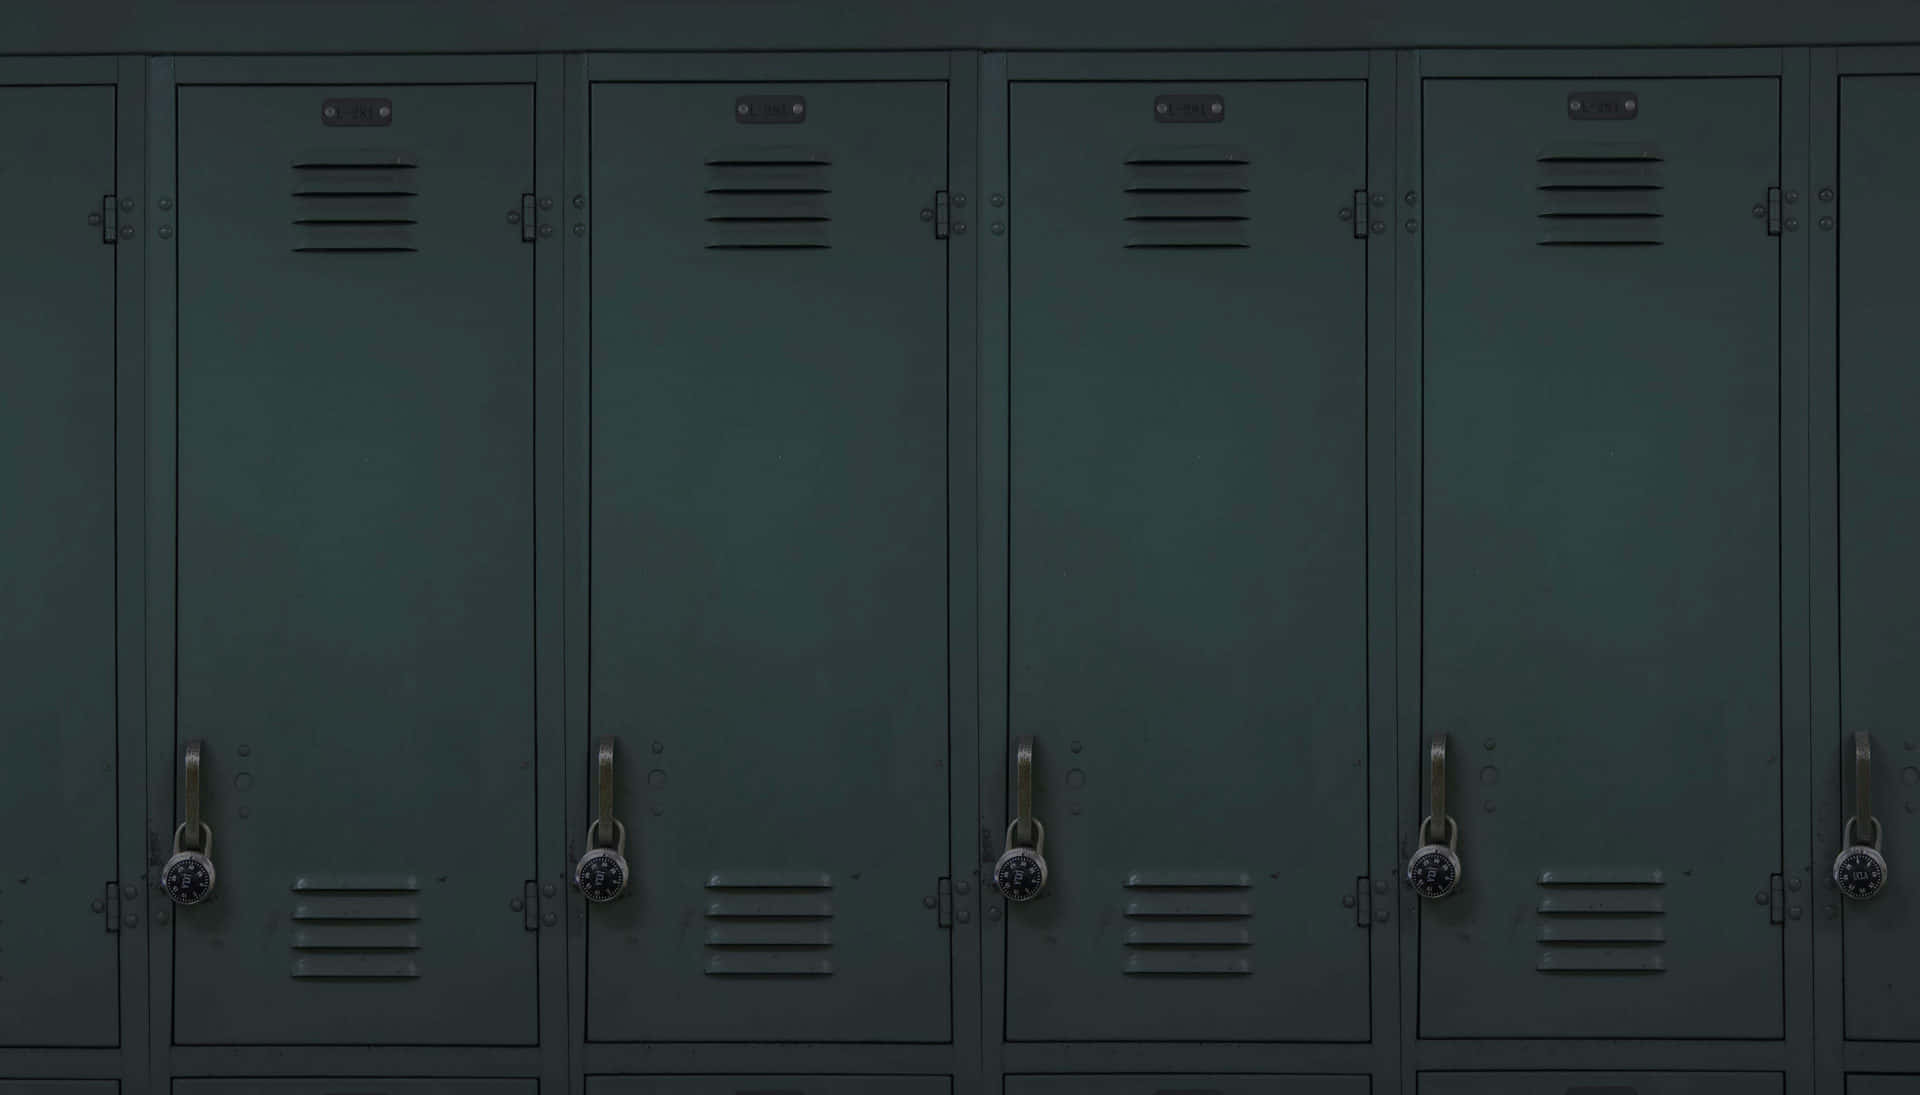 Keep your valuables safe in a secure locker